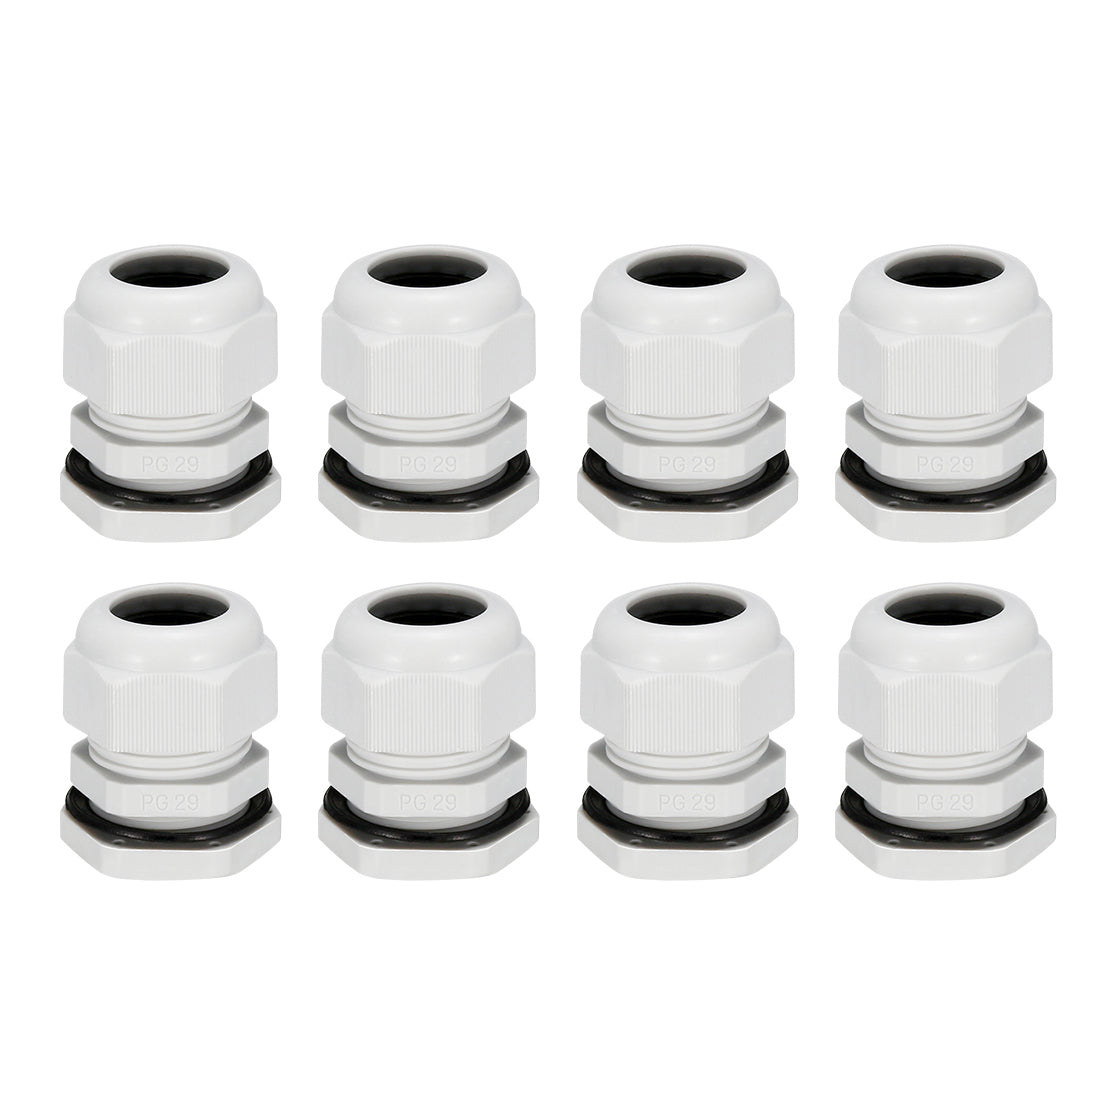 uxcell Uxcell 8Pcs PG29 Cable Gland Waterproof Plastic Joint Adjustable Locknut White for 18mm-25mm Dia Cable Wire